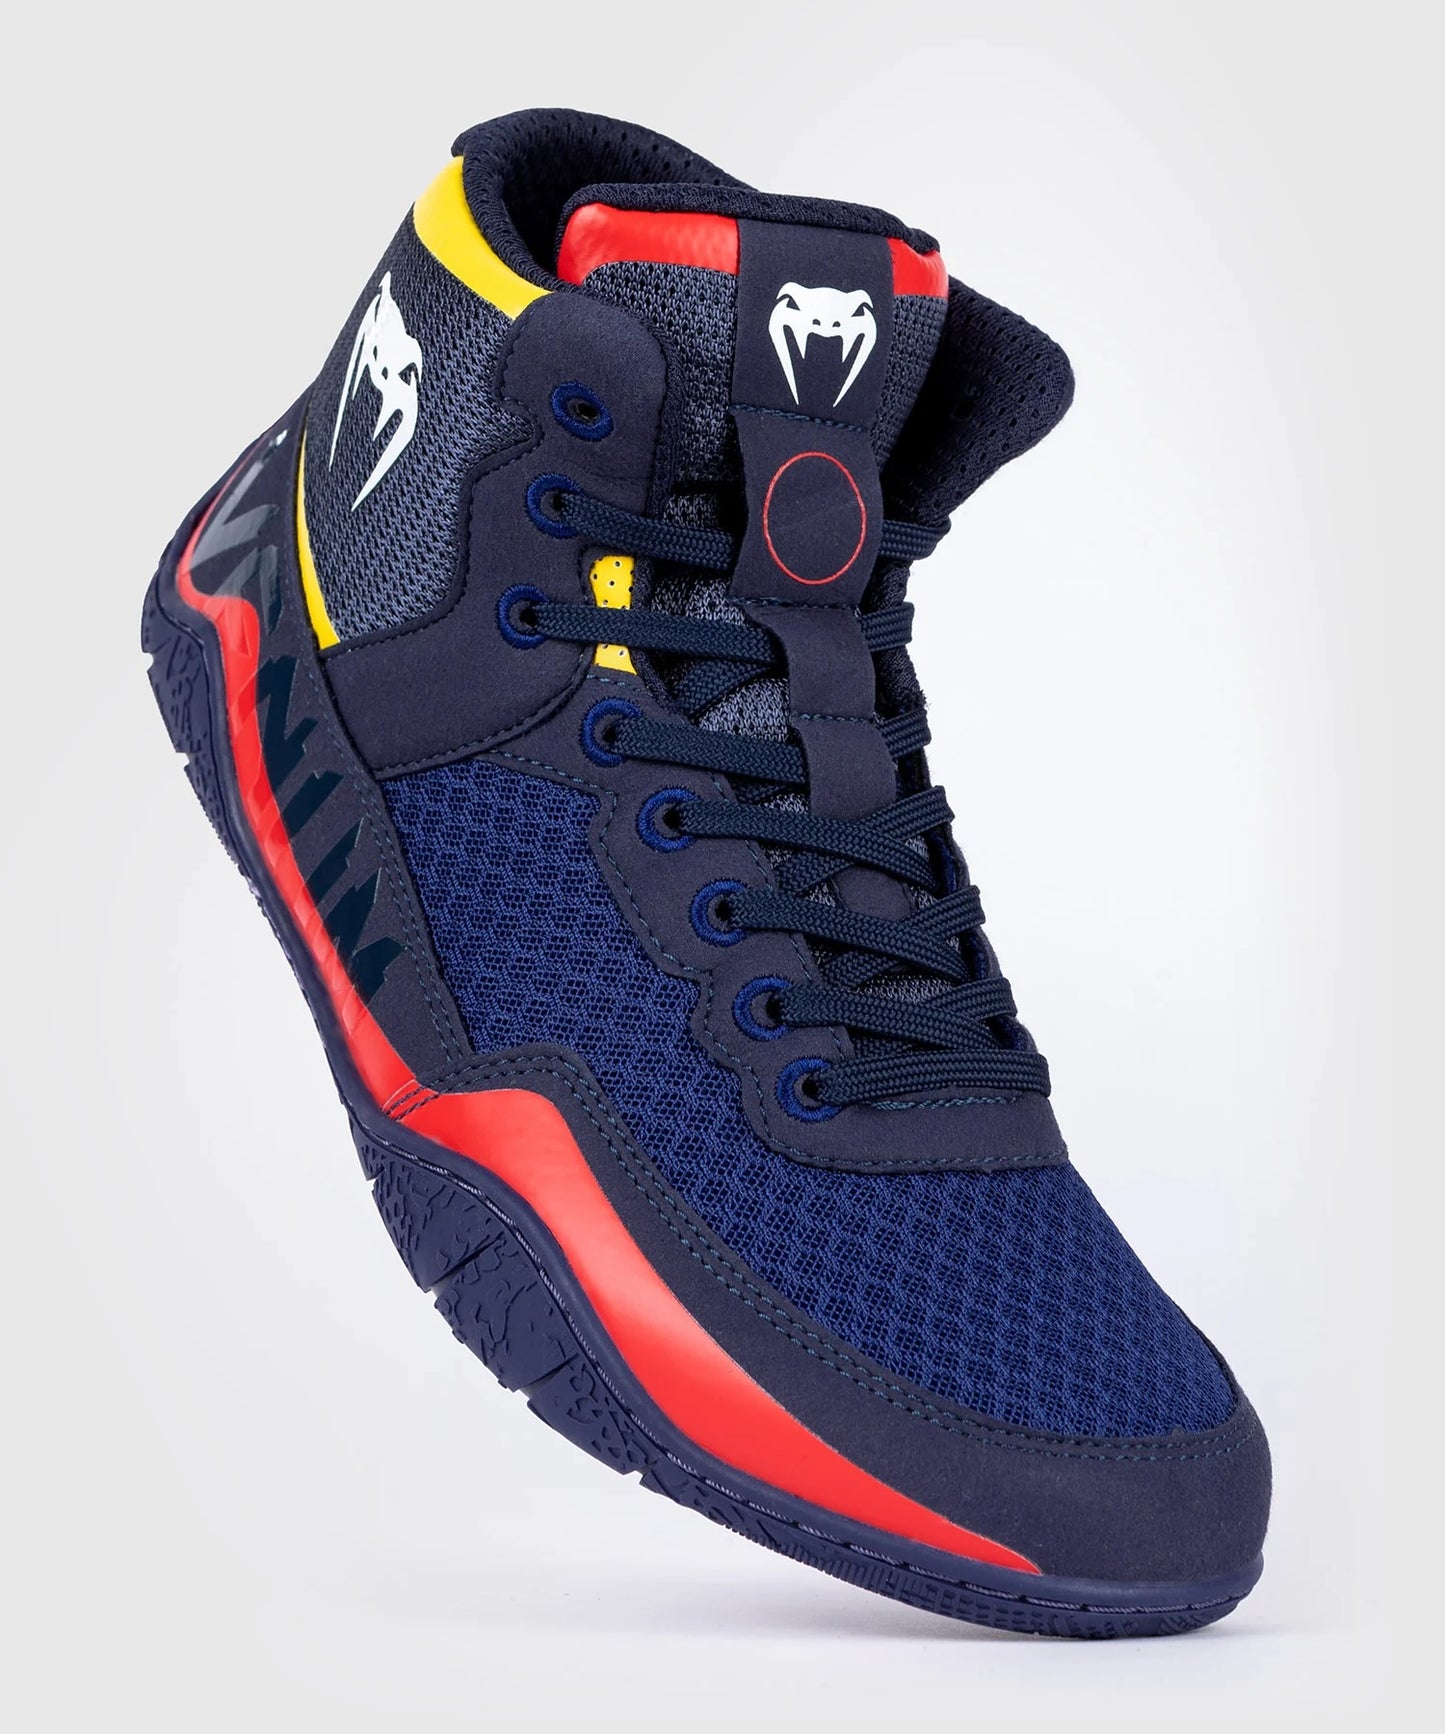 Elite Fitness Shoes - Blue Yellow